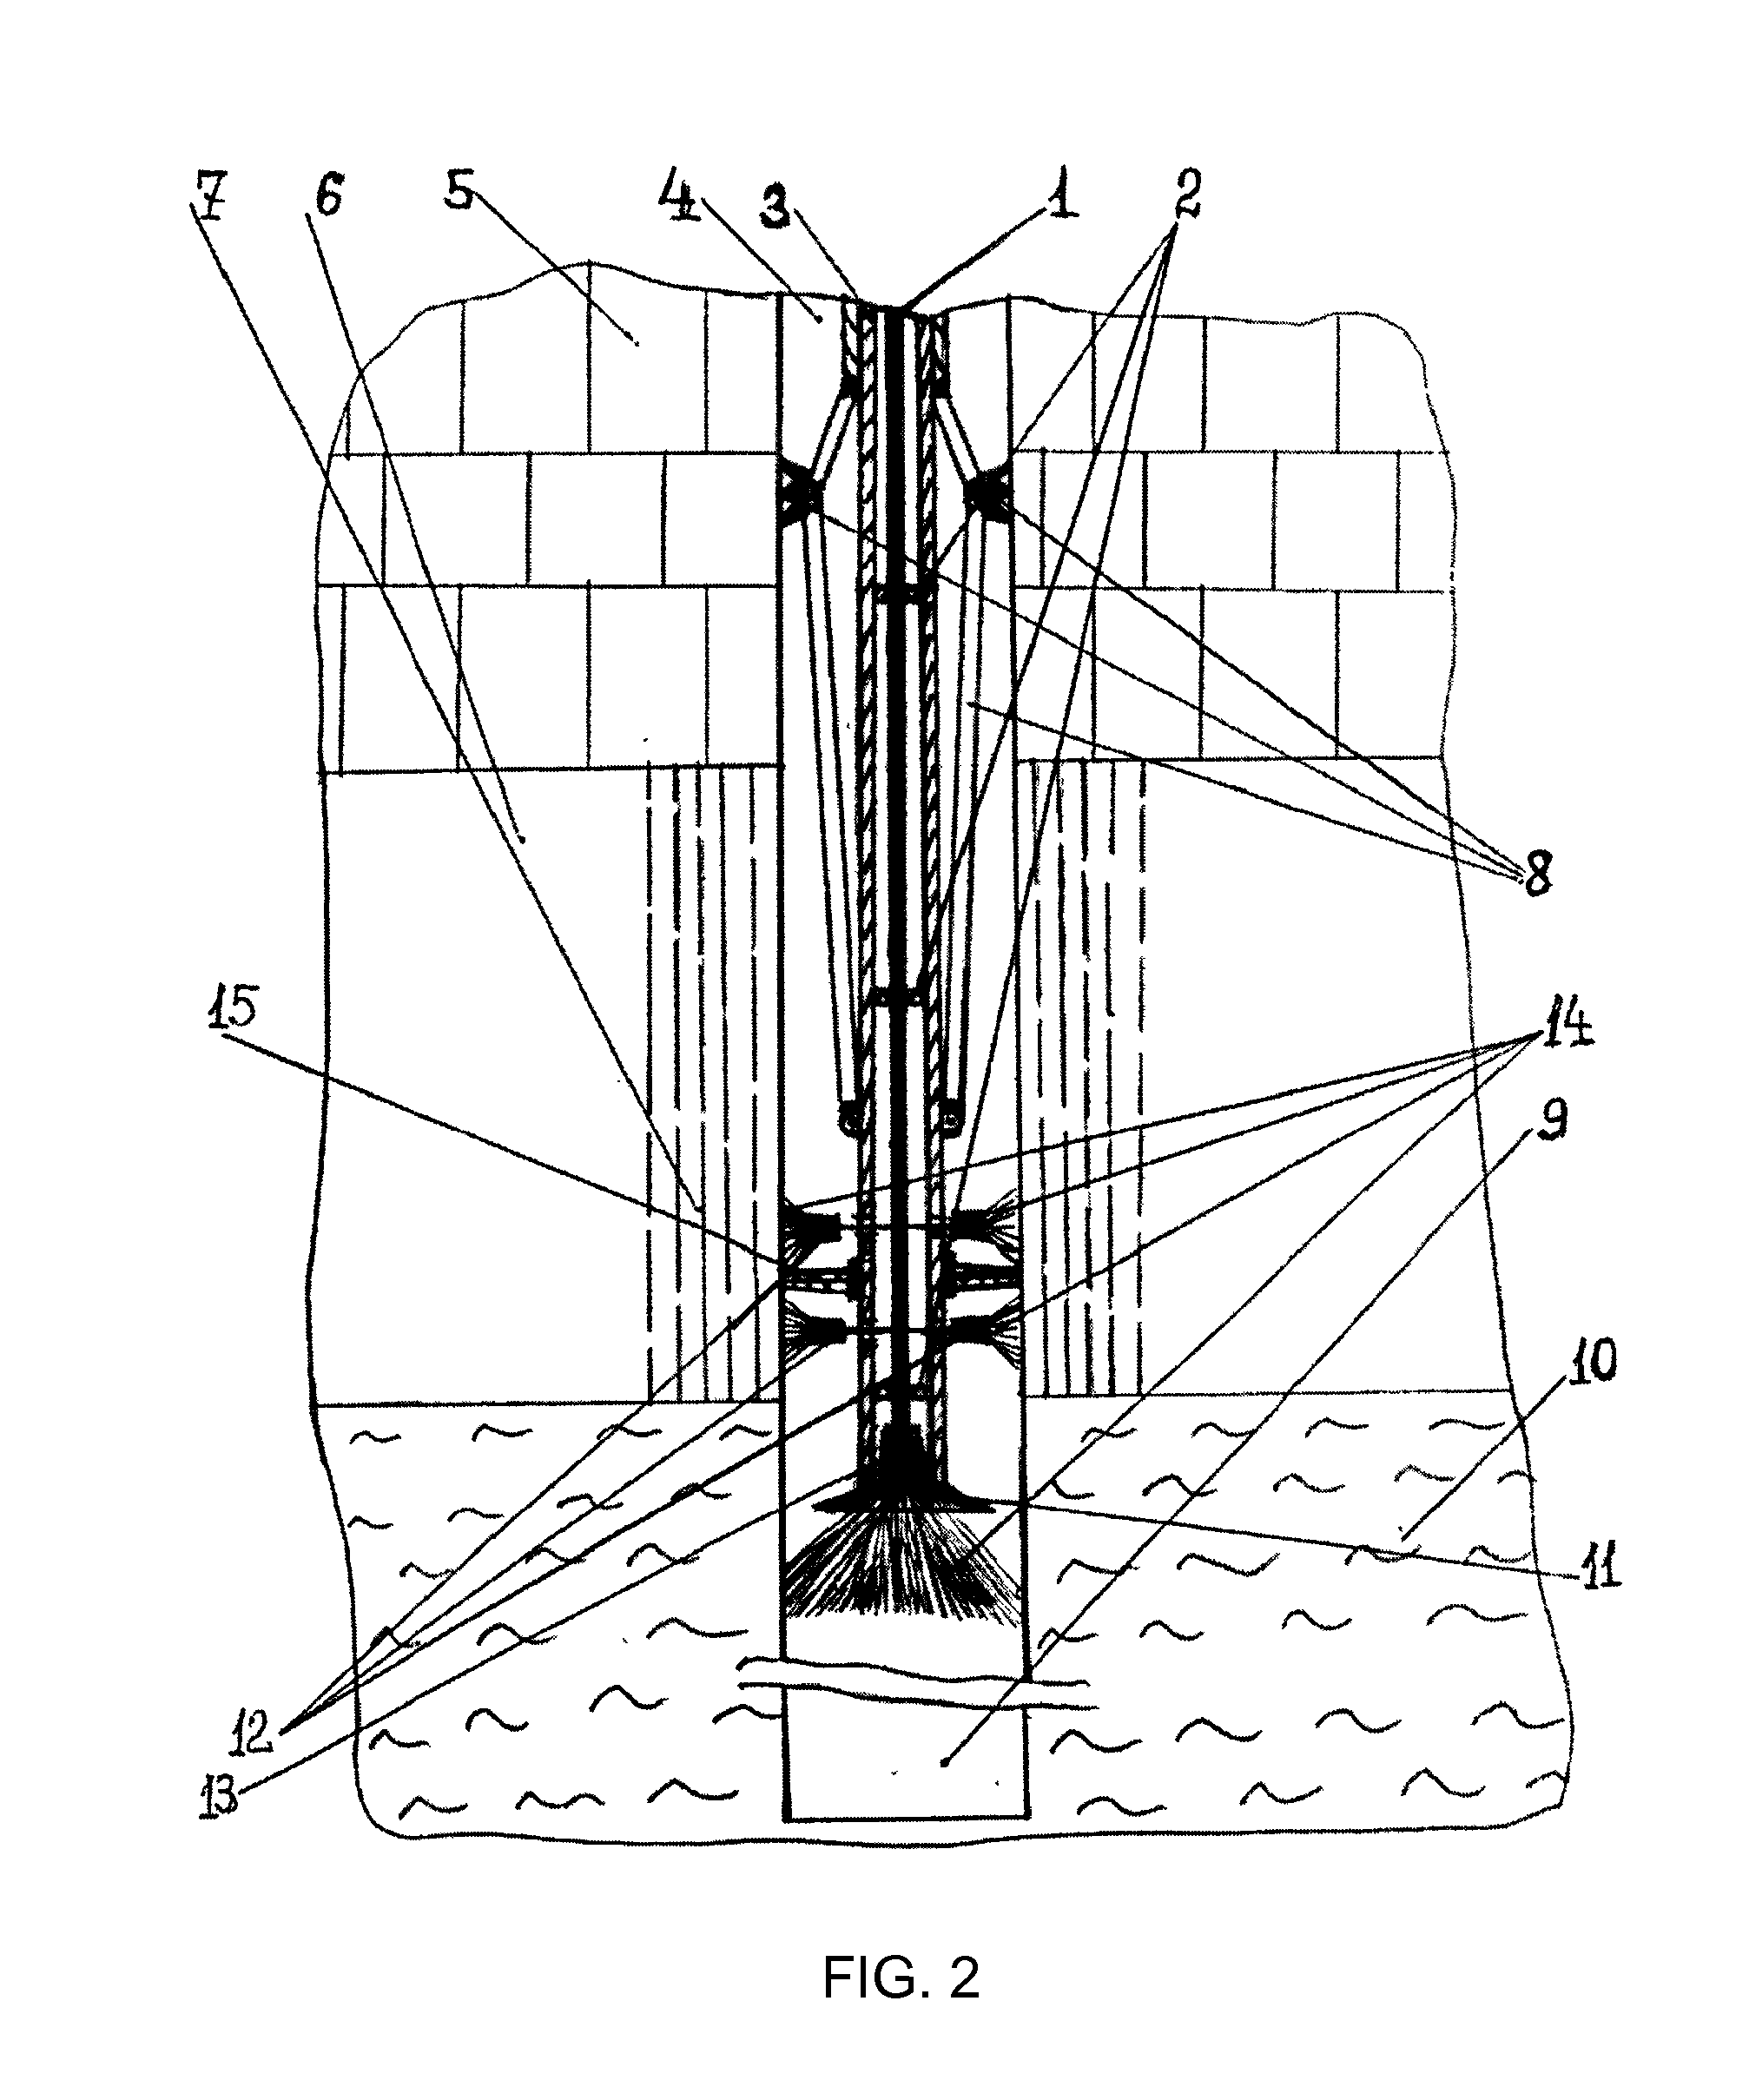 Method For Developing Oil And Gas Fields Using High-Power Laser Radiation For
More Complete Oil And Gas Extraction